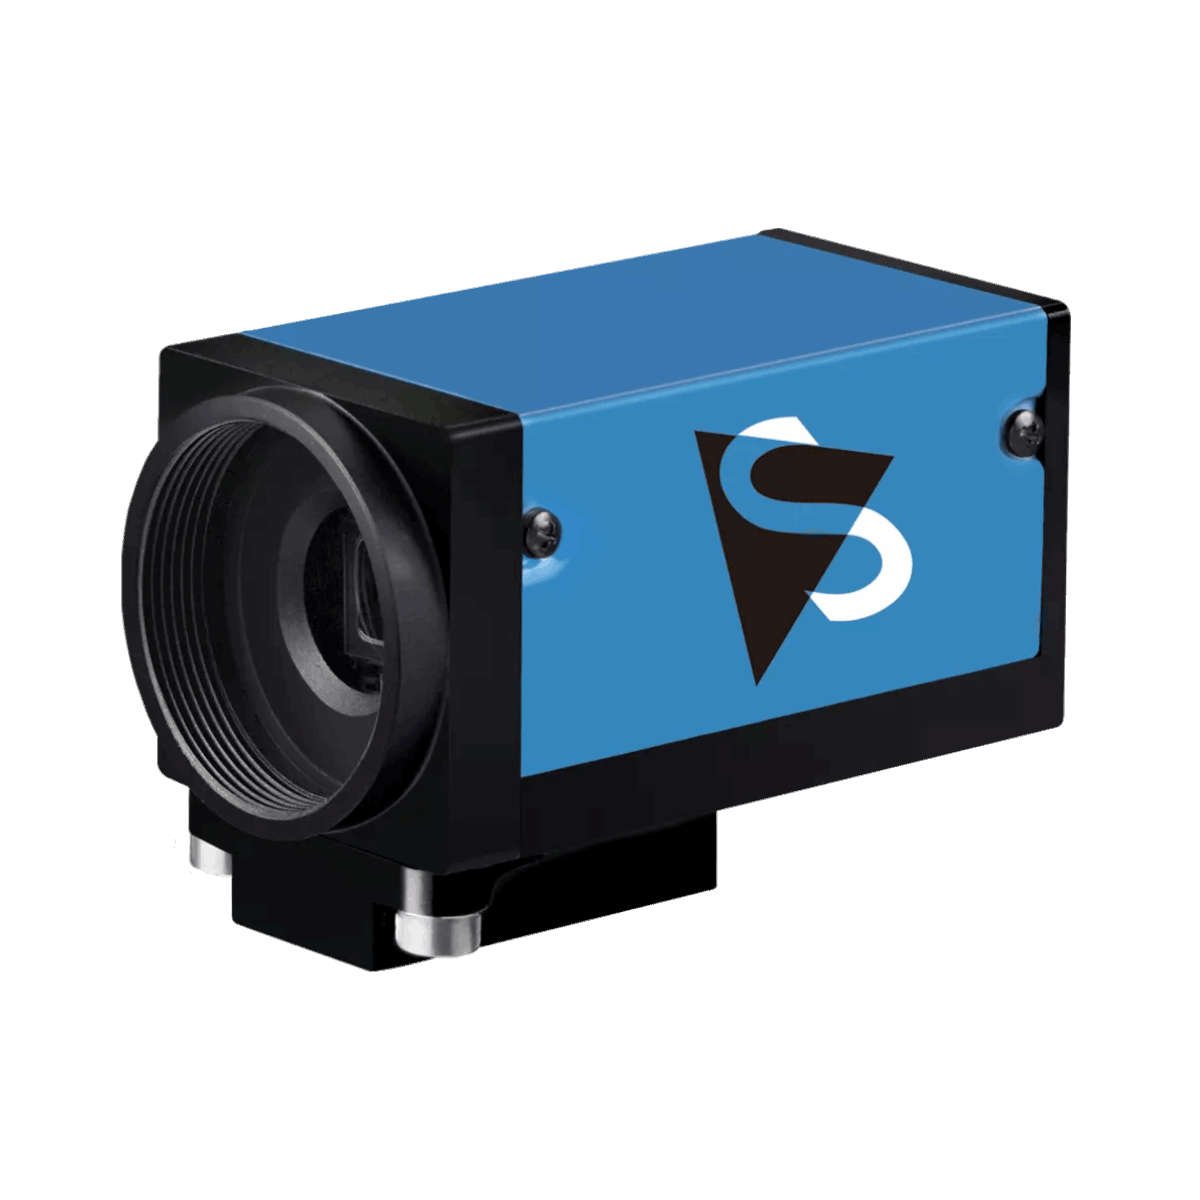 A product image of The Imaging Source DFK 33GX287 Colour Camera